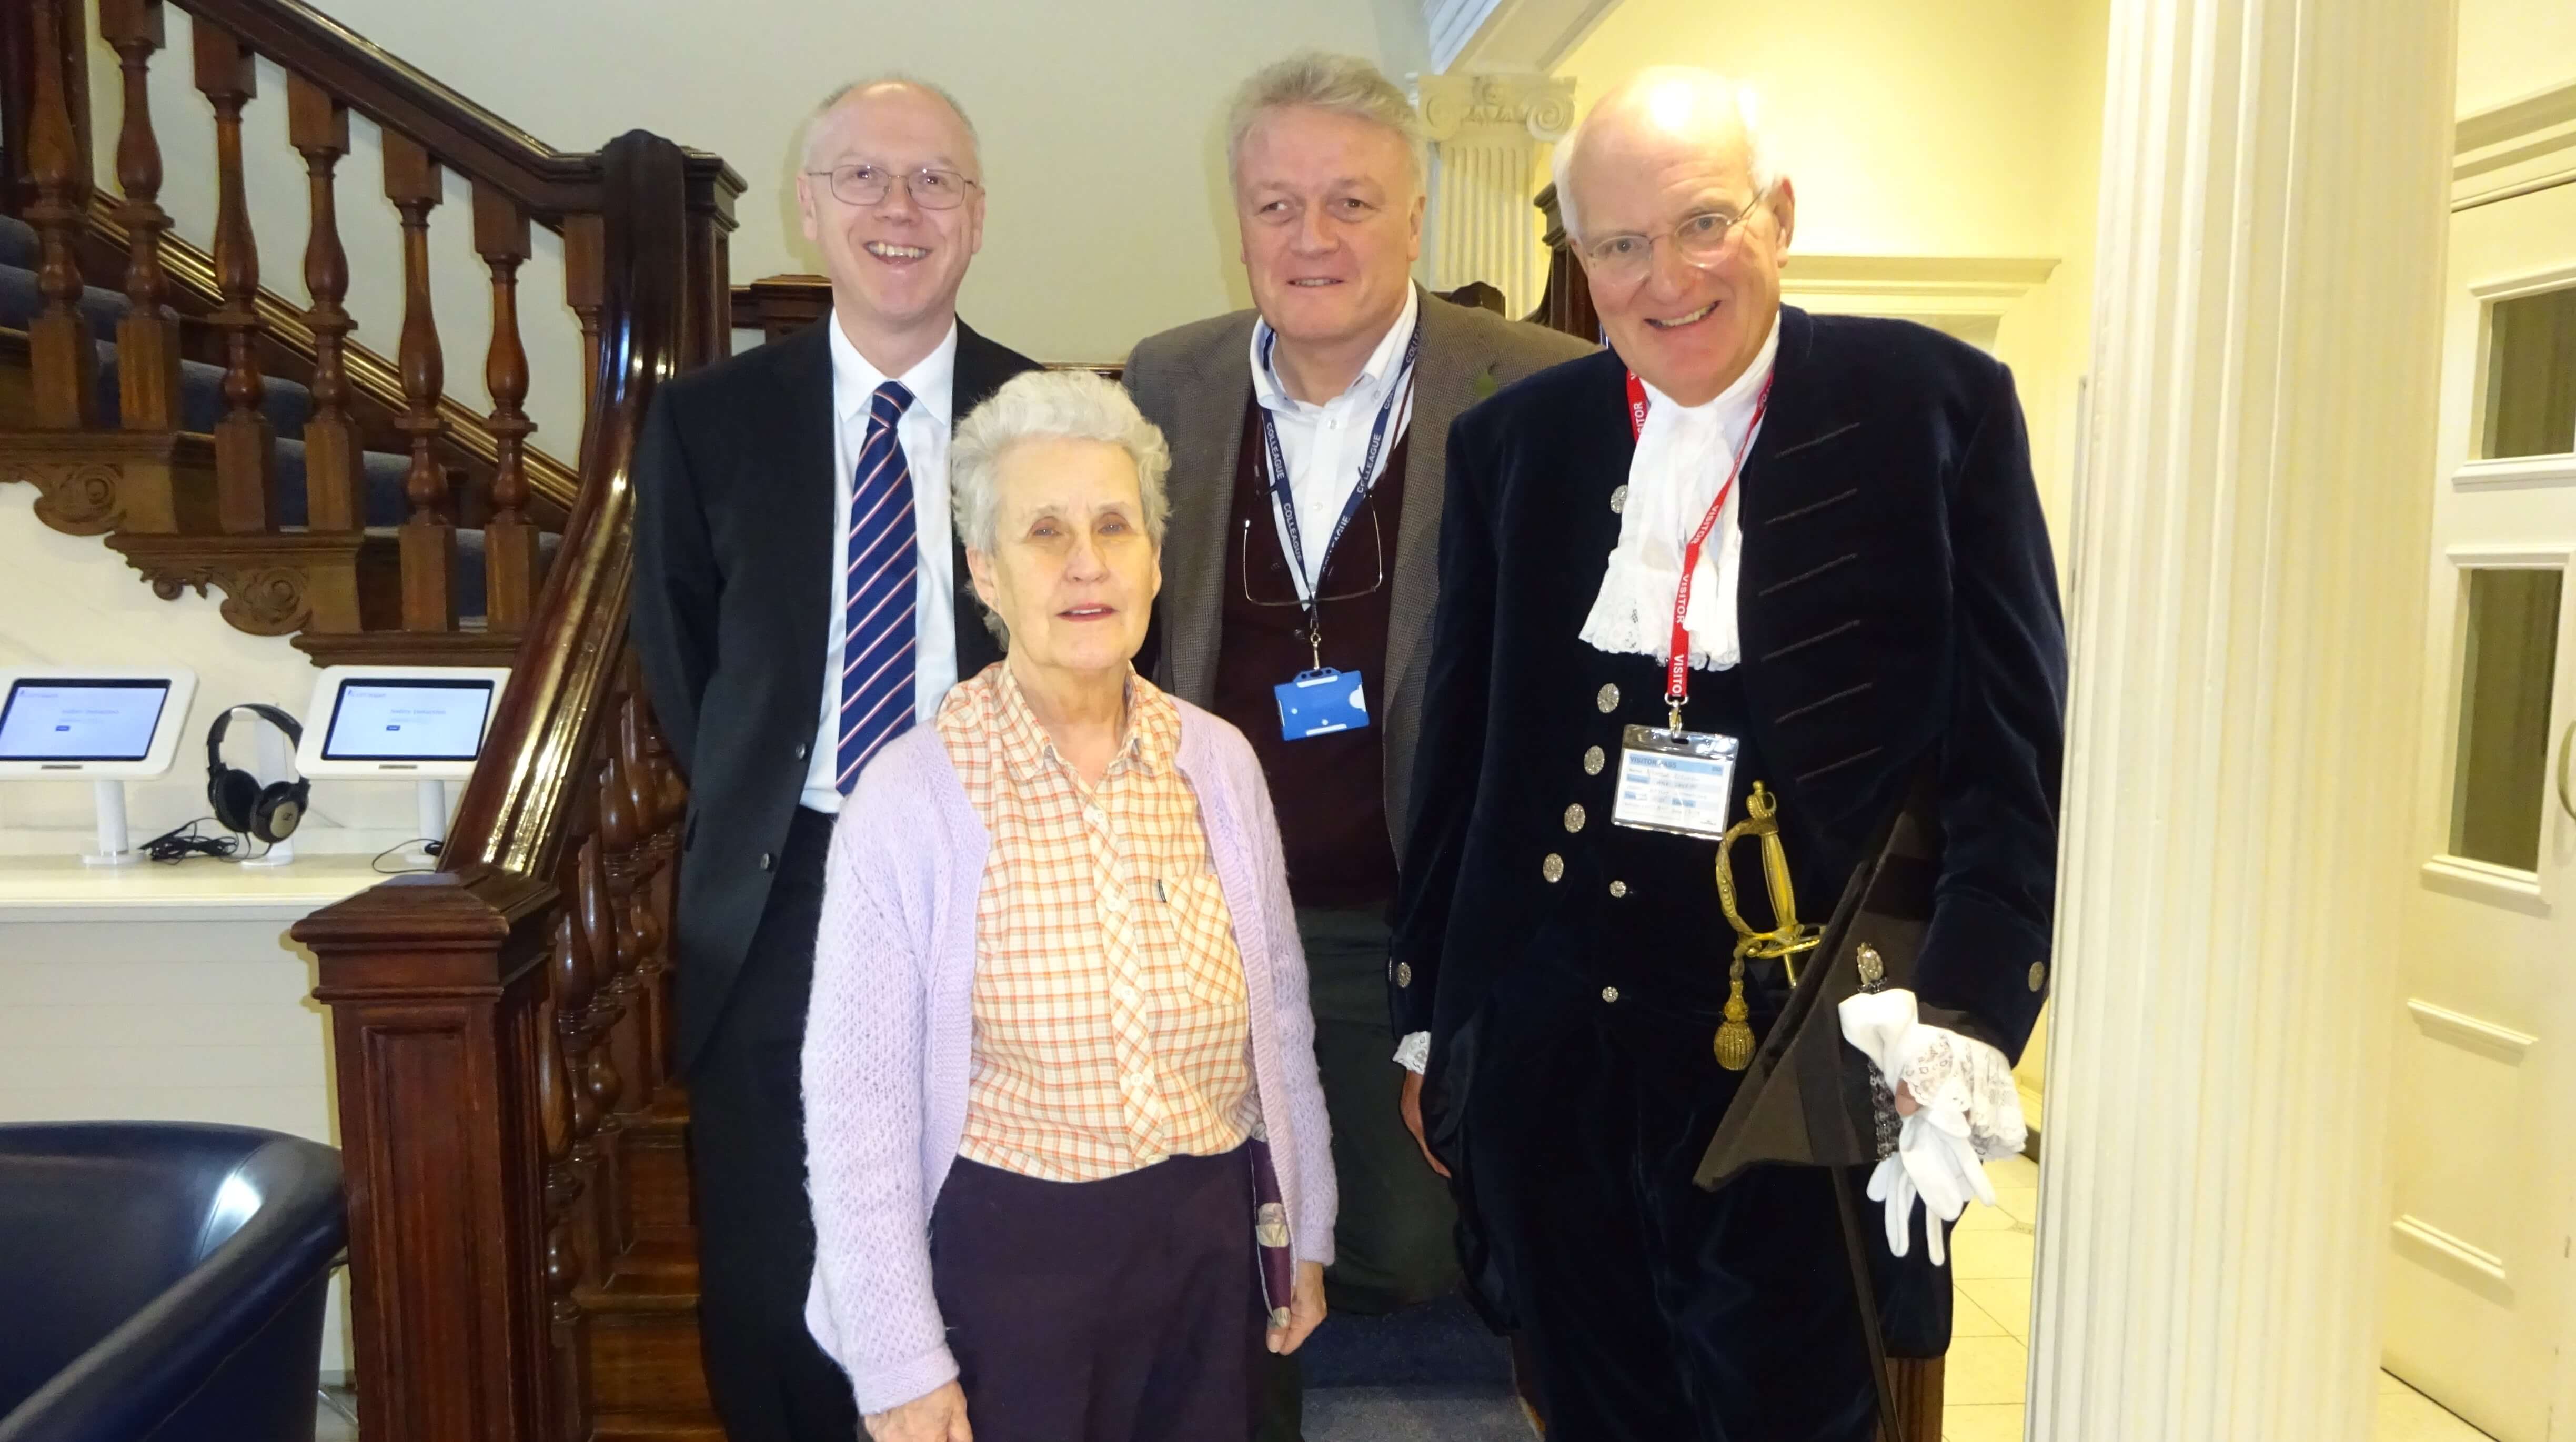 Scott Bader UK is visited by the High Sheriff of Northamptonshire